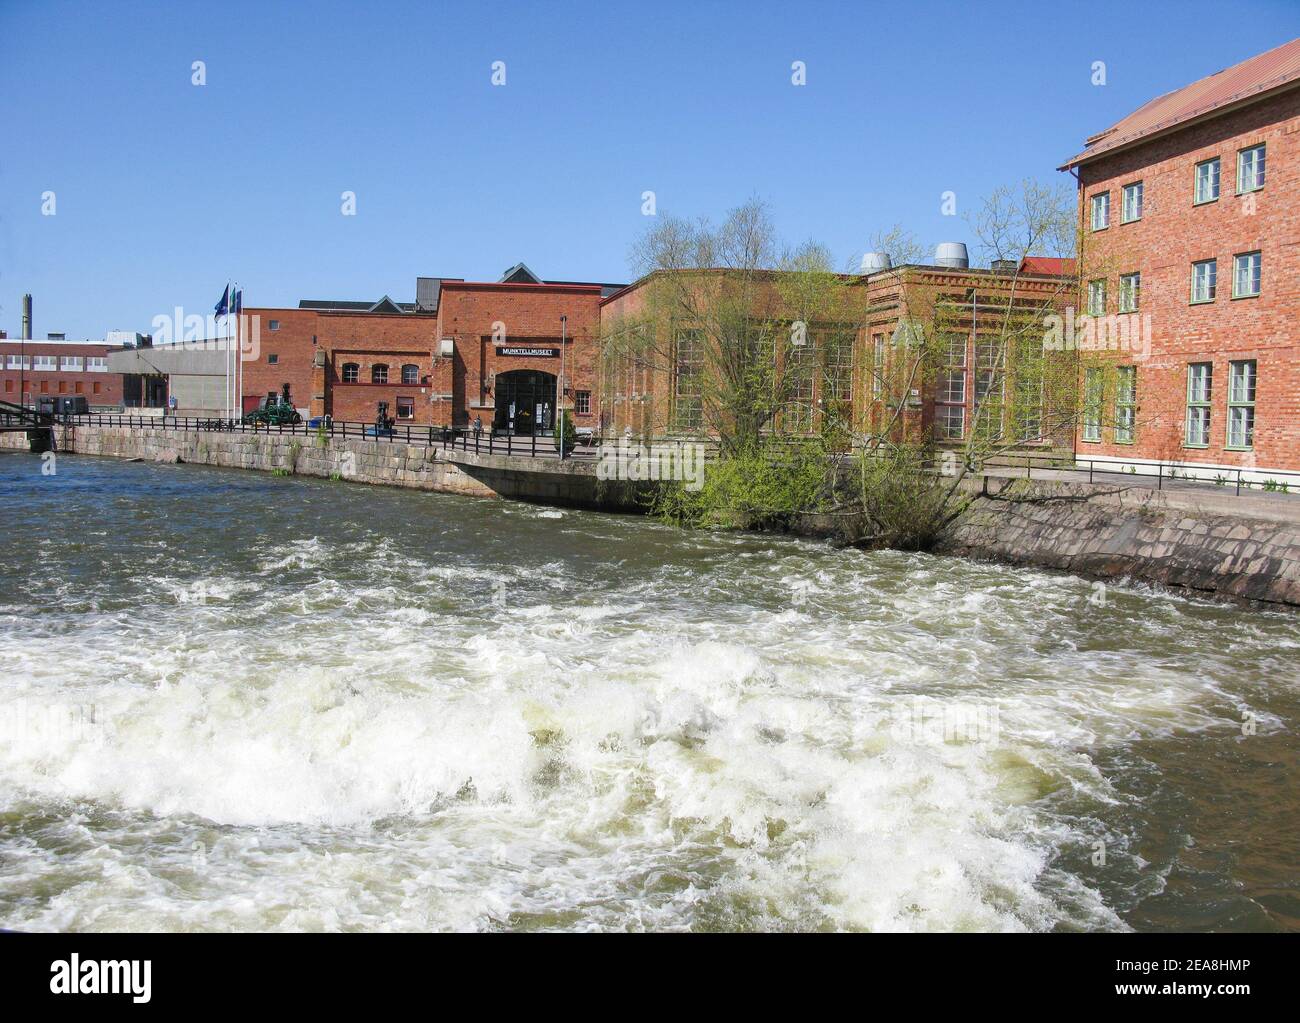 RUSHING masses of WATER in the river below the Bolinder Munktell museum in Eskilstuna Södermanland Stock Photo